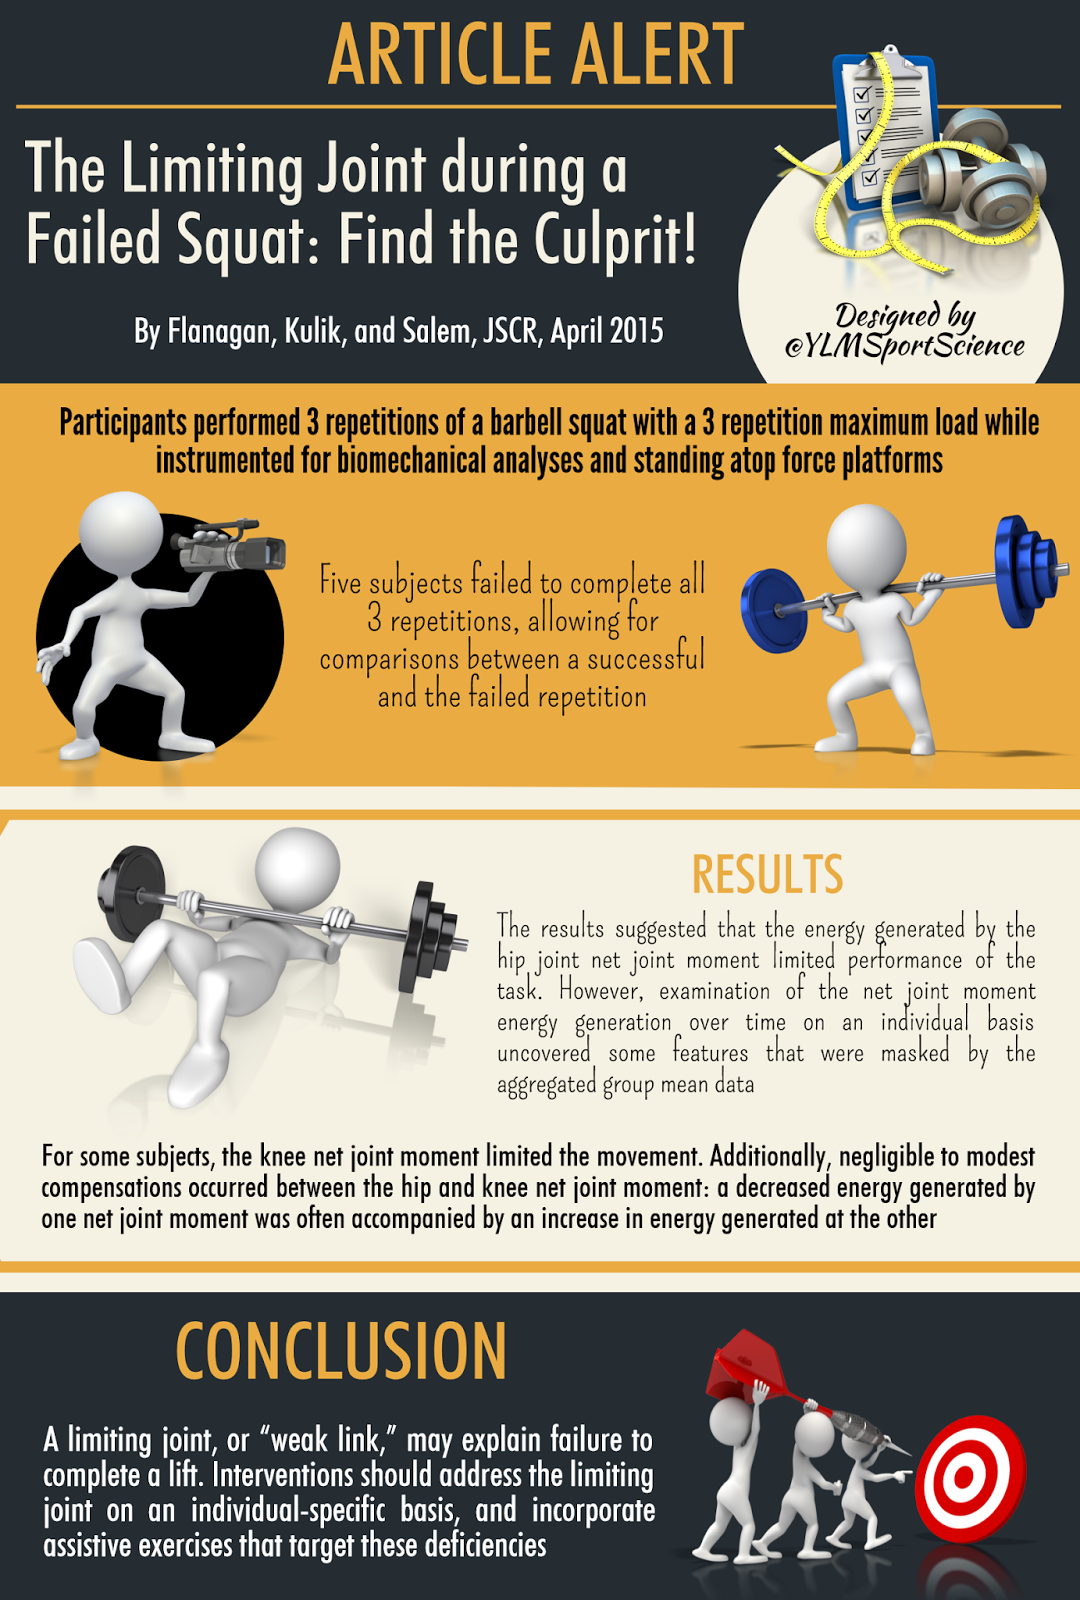 The Limiting Joint during a Failed Squat: Find the Culprit